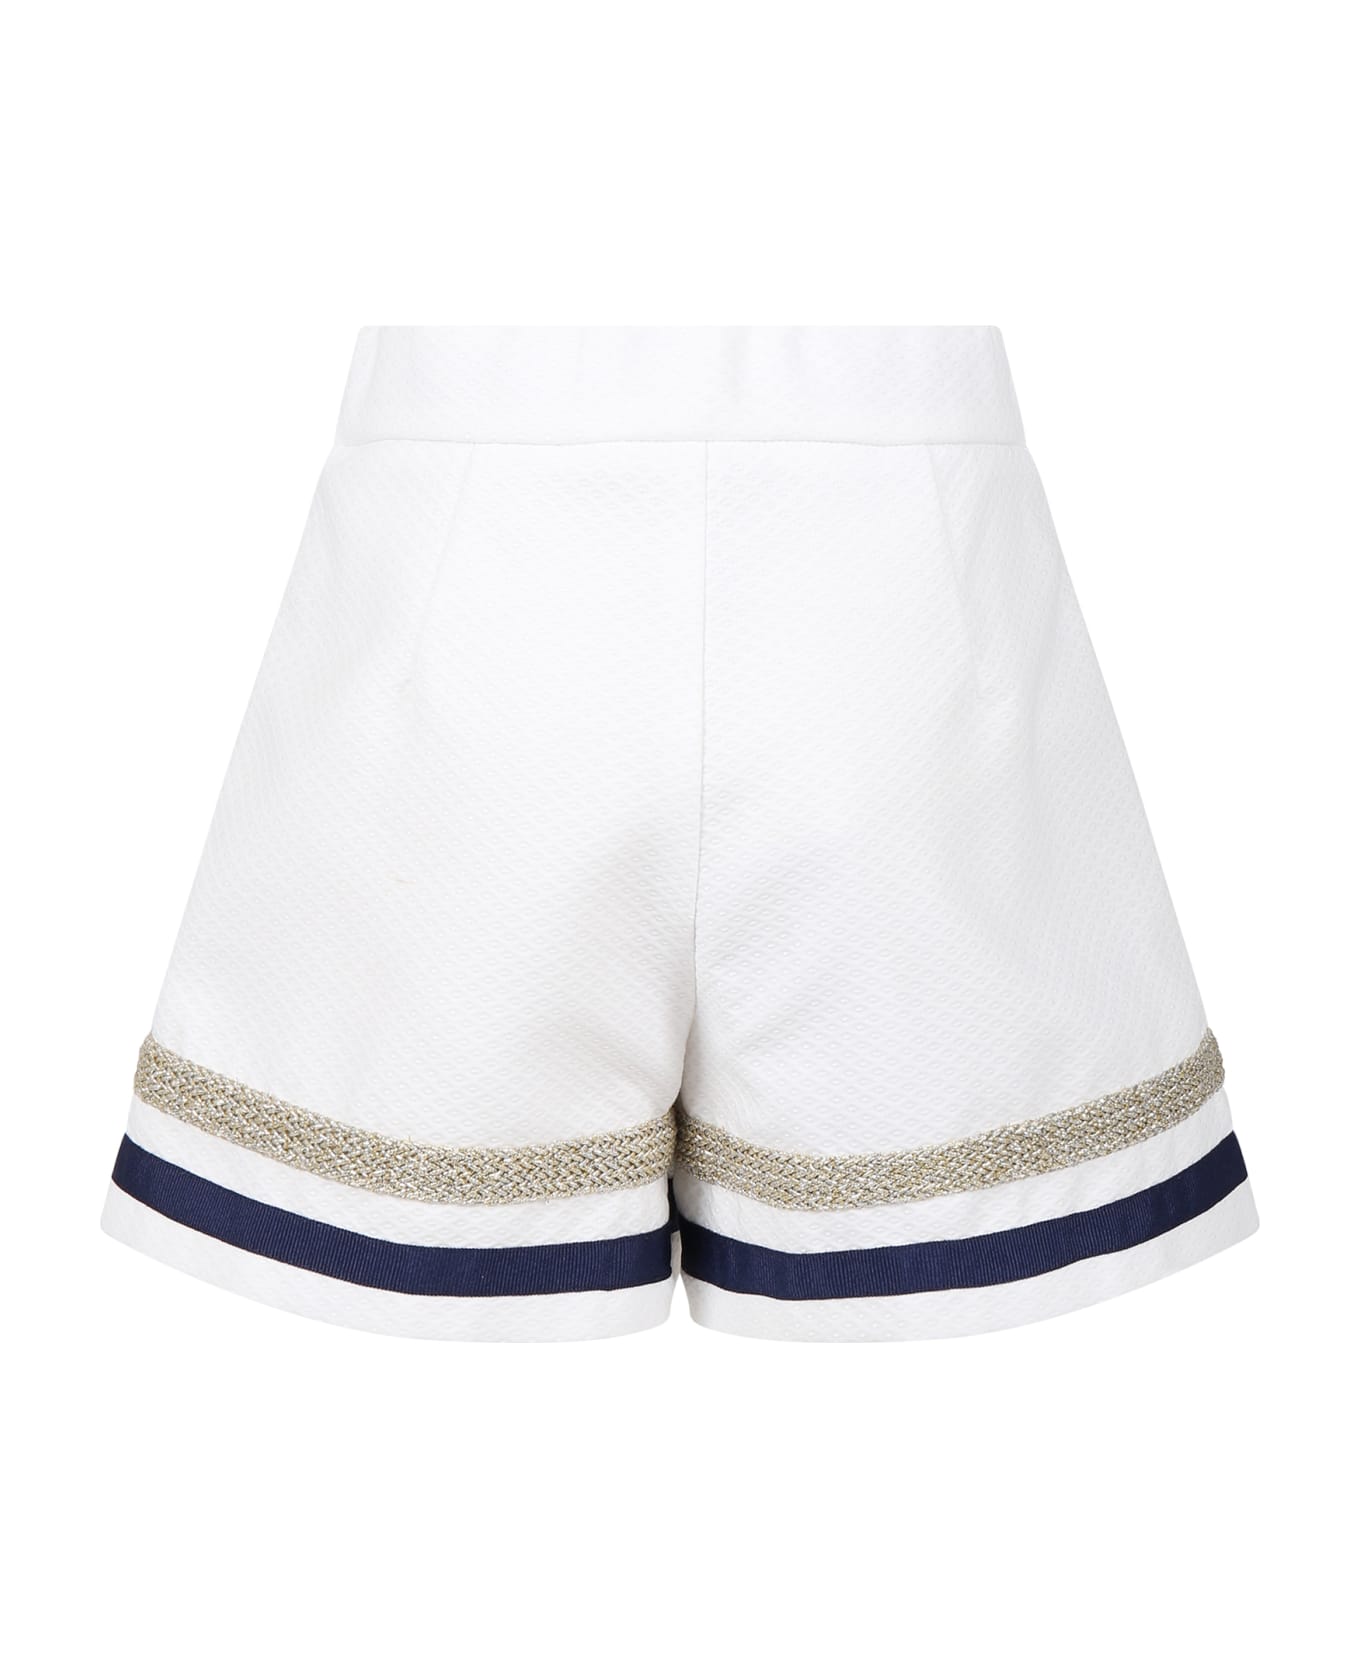 Genny White Shorts For Girl With Blue And Lurex Details - White